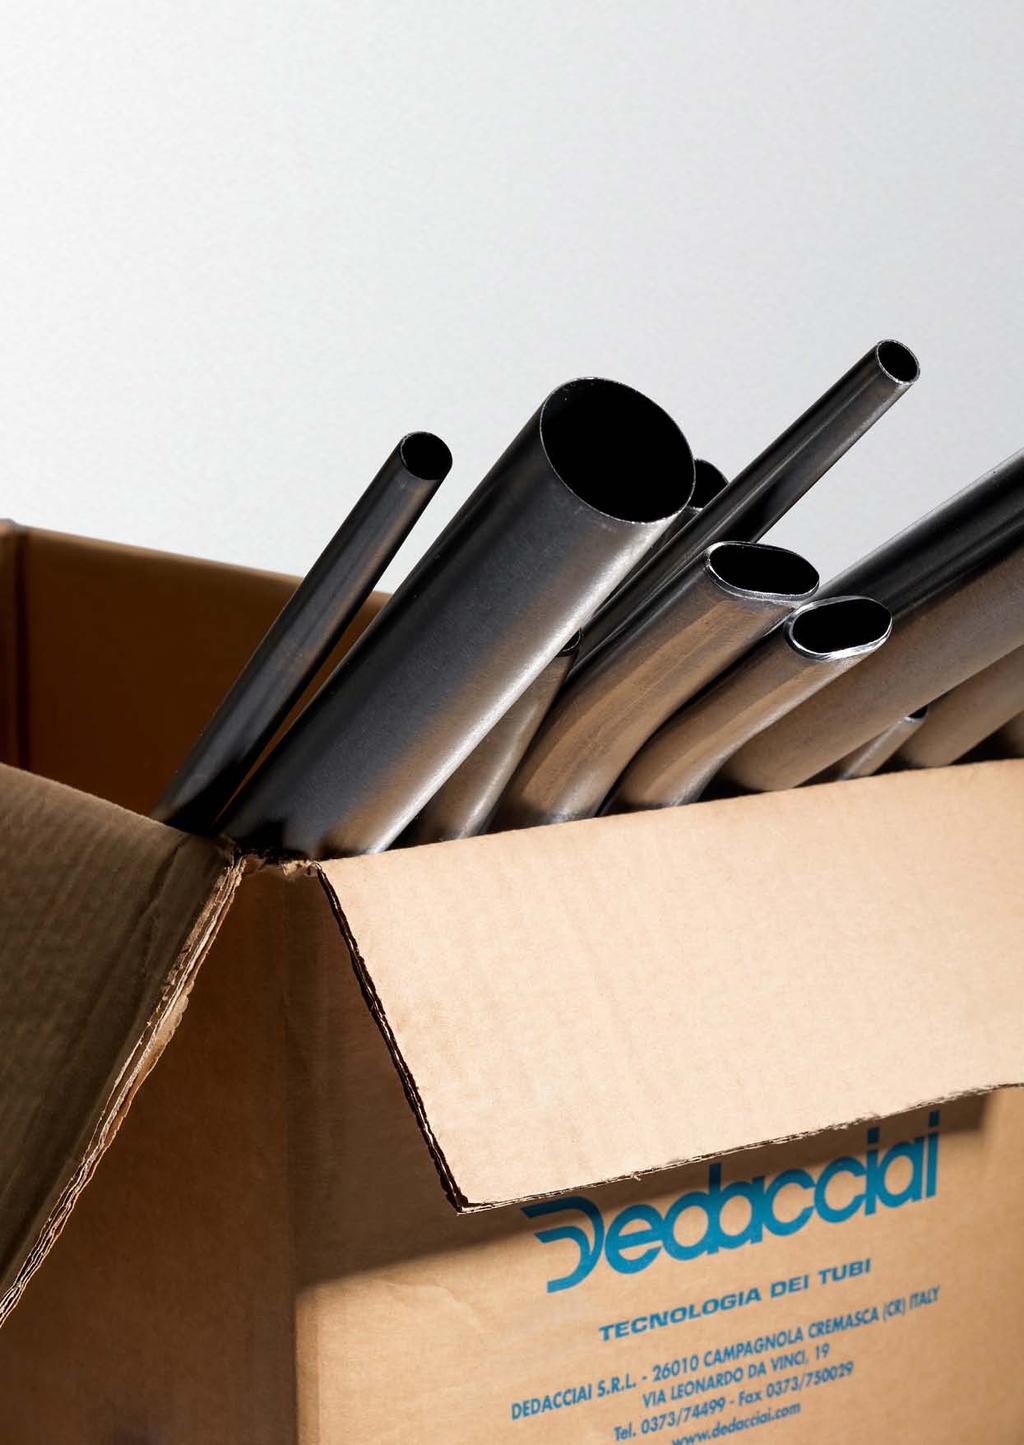 Dedacciai was established in 1992 with the aim of manufacturing